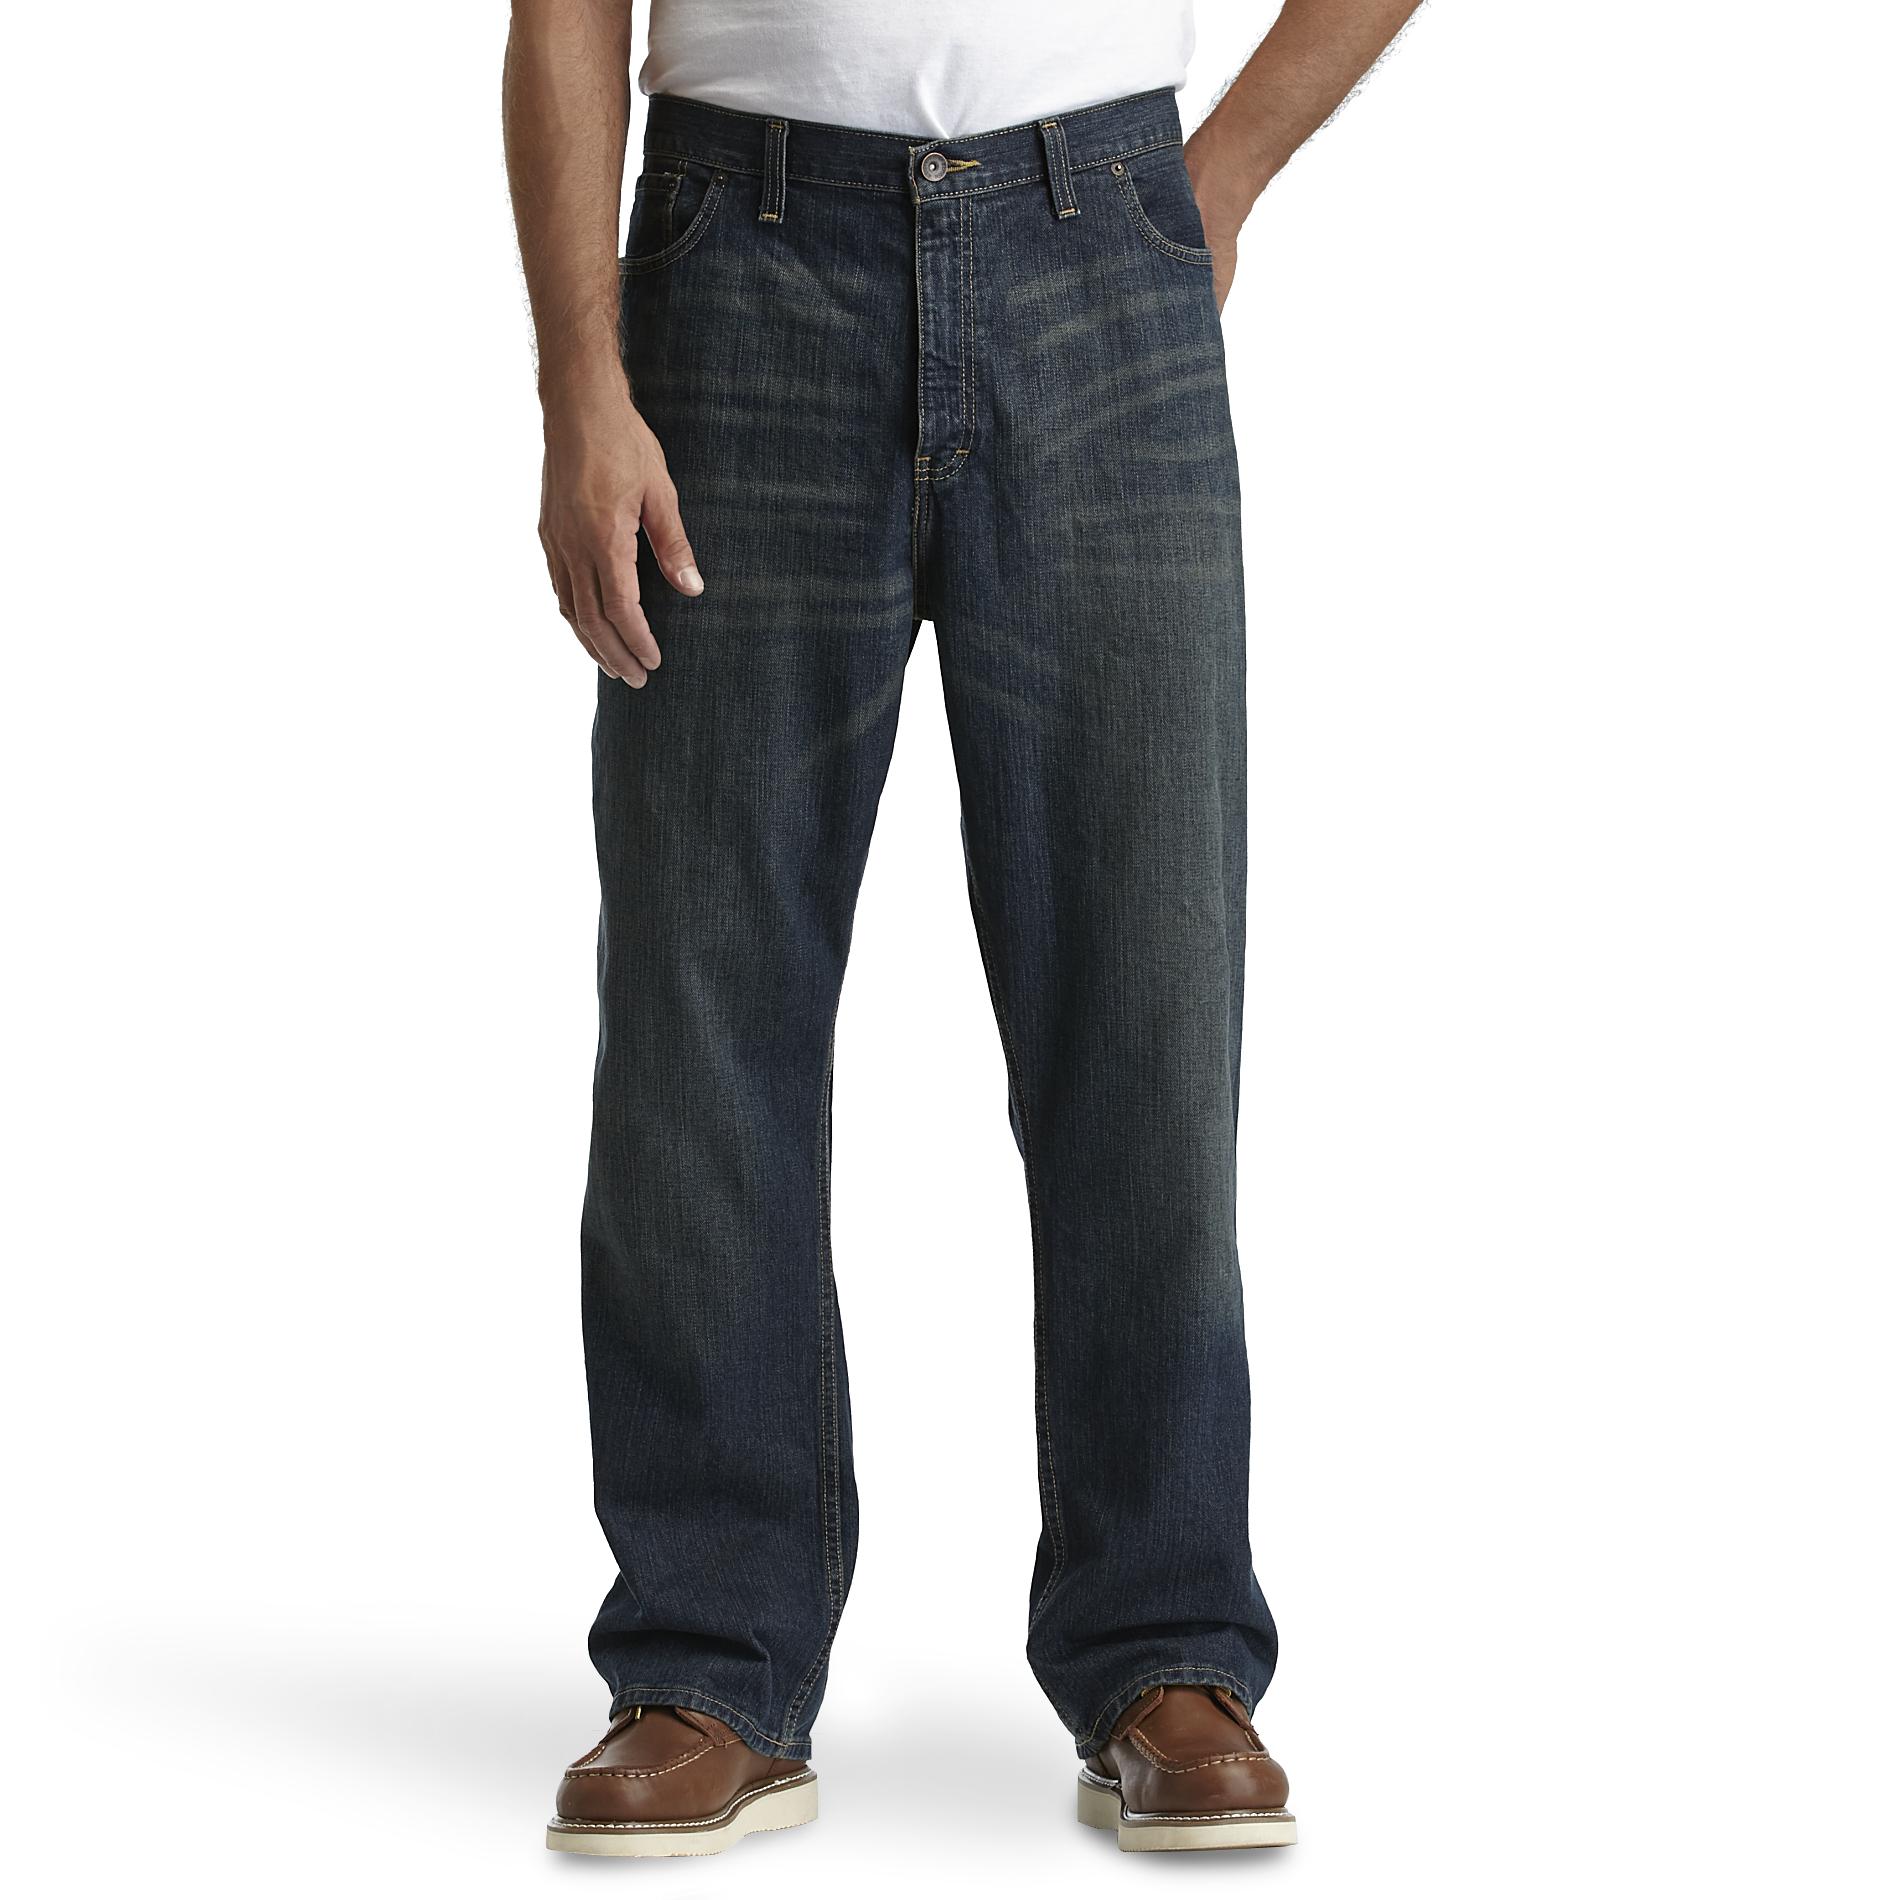 Route 66 Men's Big & Tall Relaxed Jeans